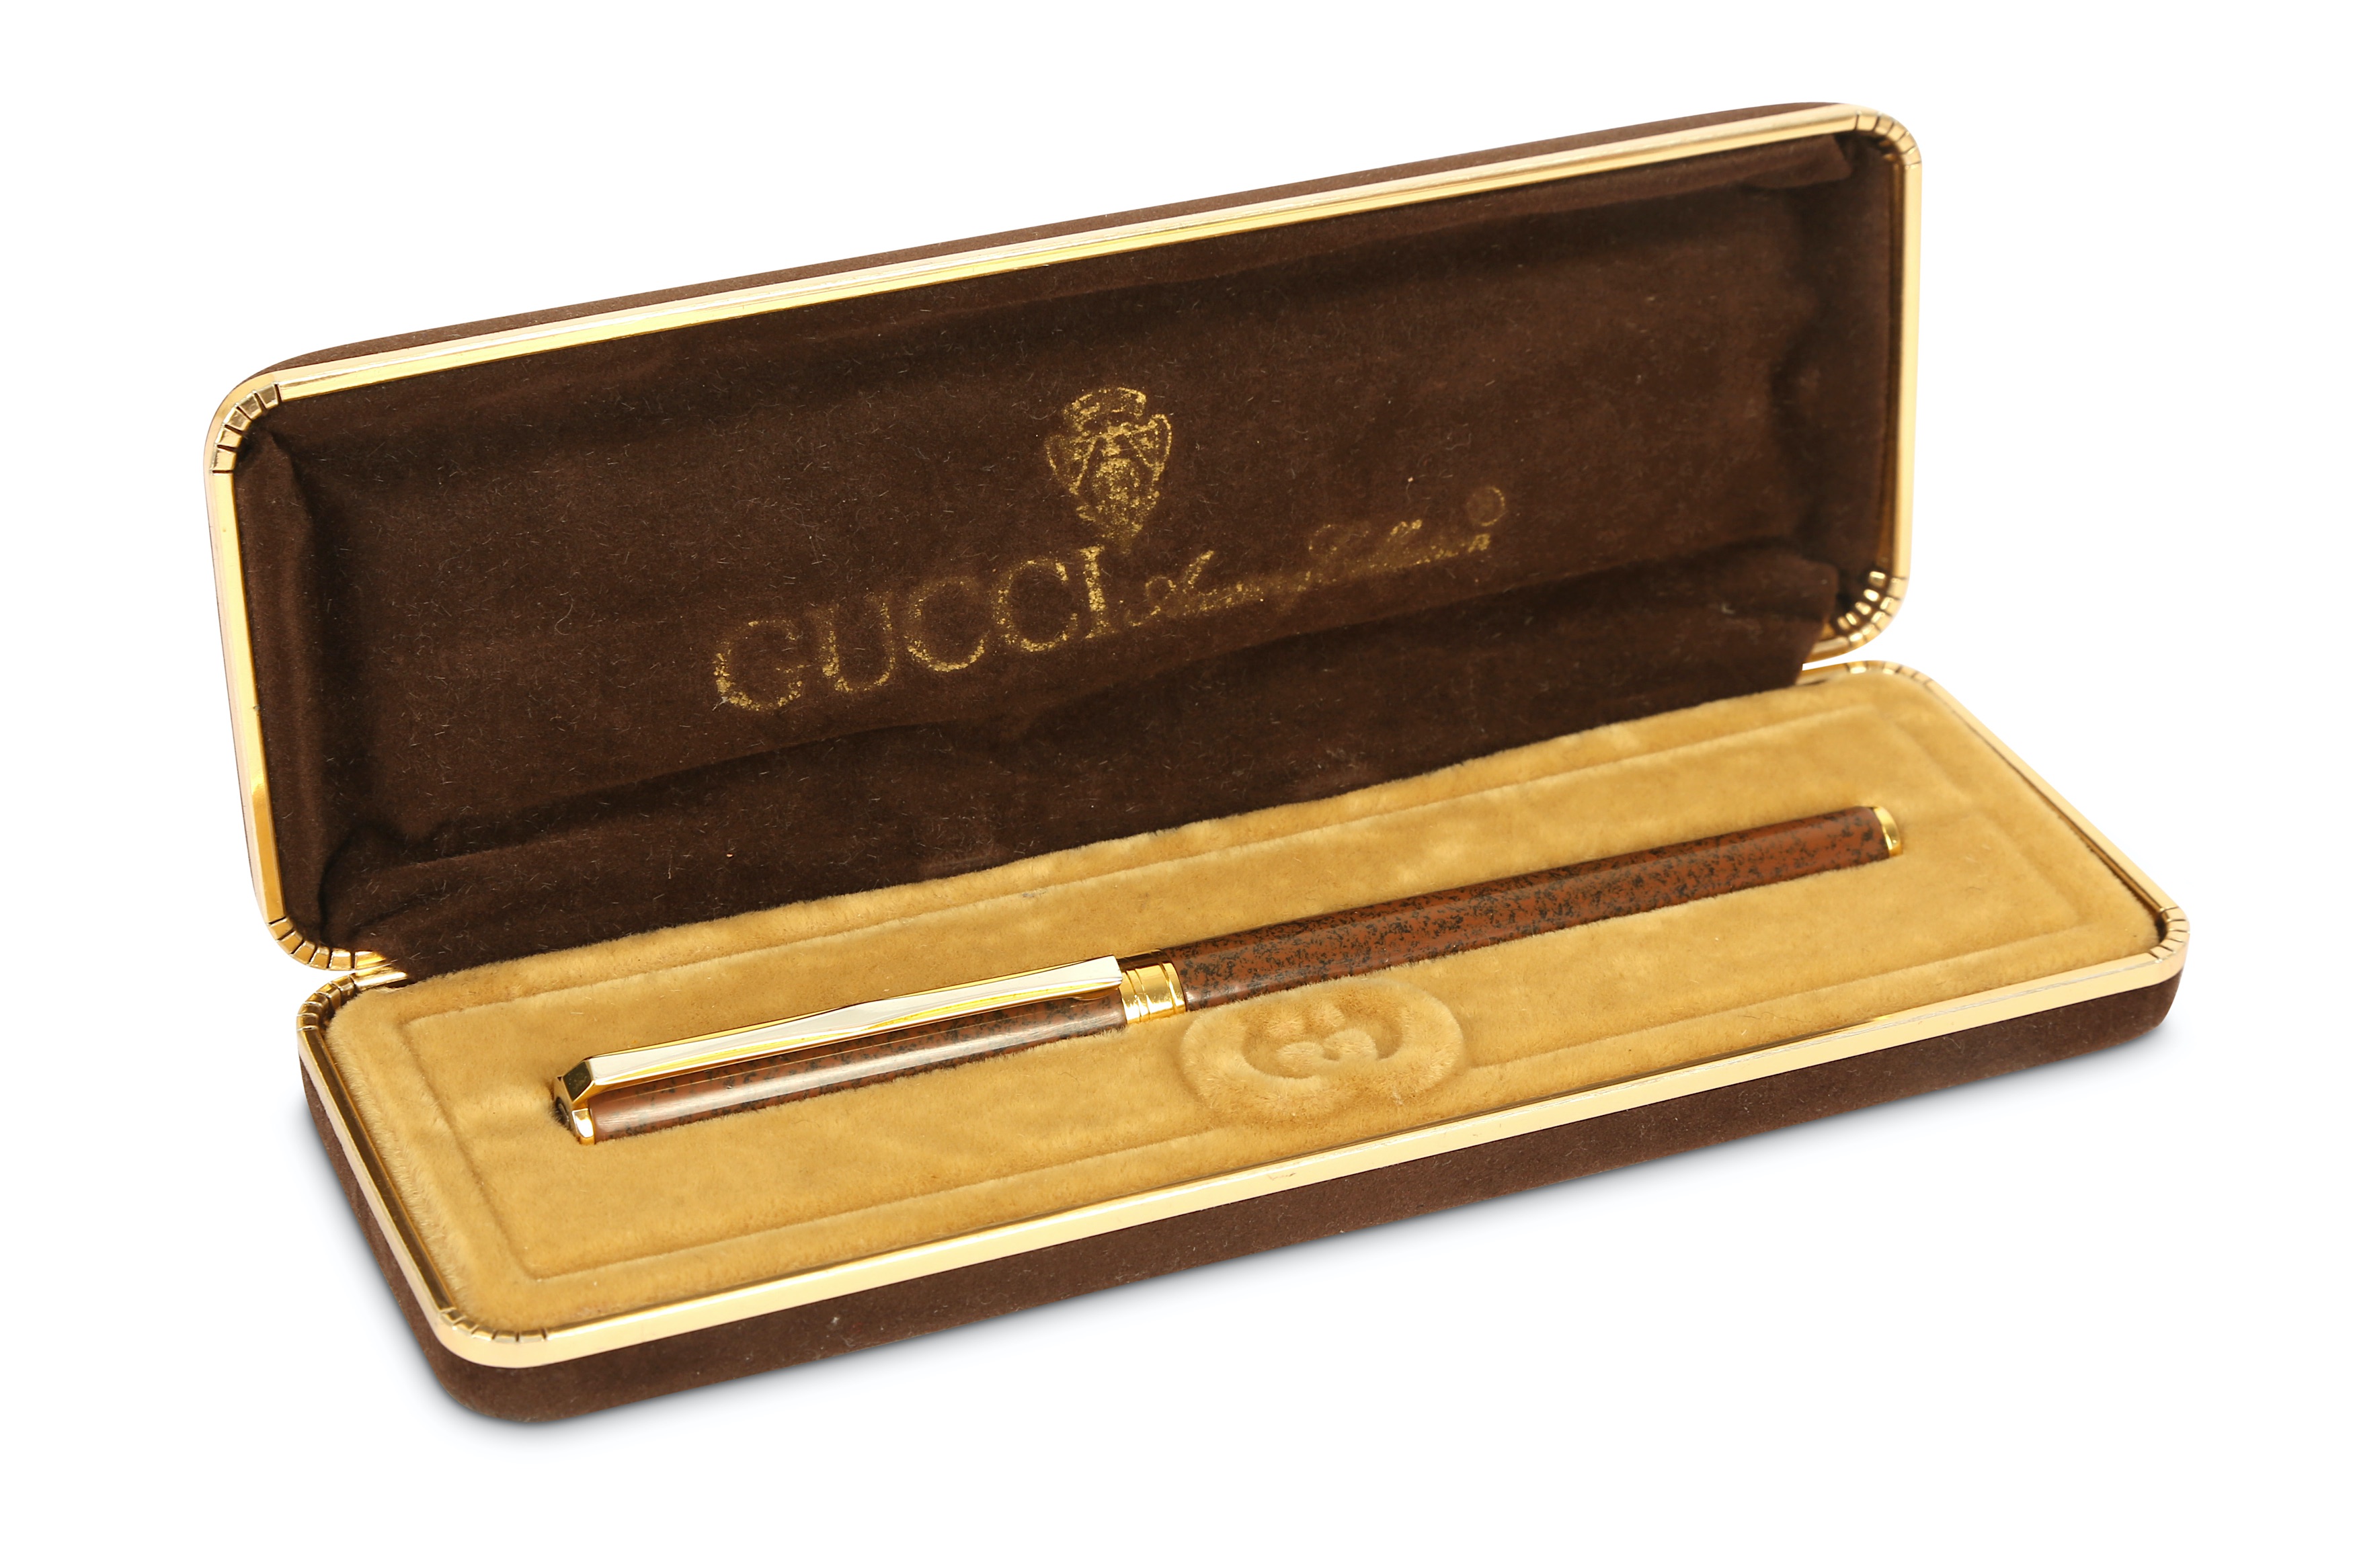 Sold at Auction: Gucci Ballpoint Pen Industrial Finish Push Top